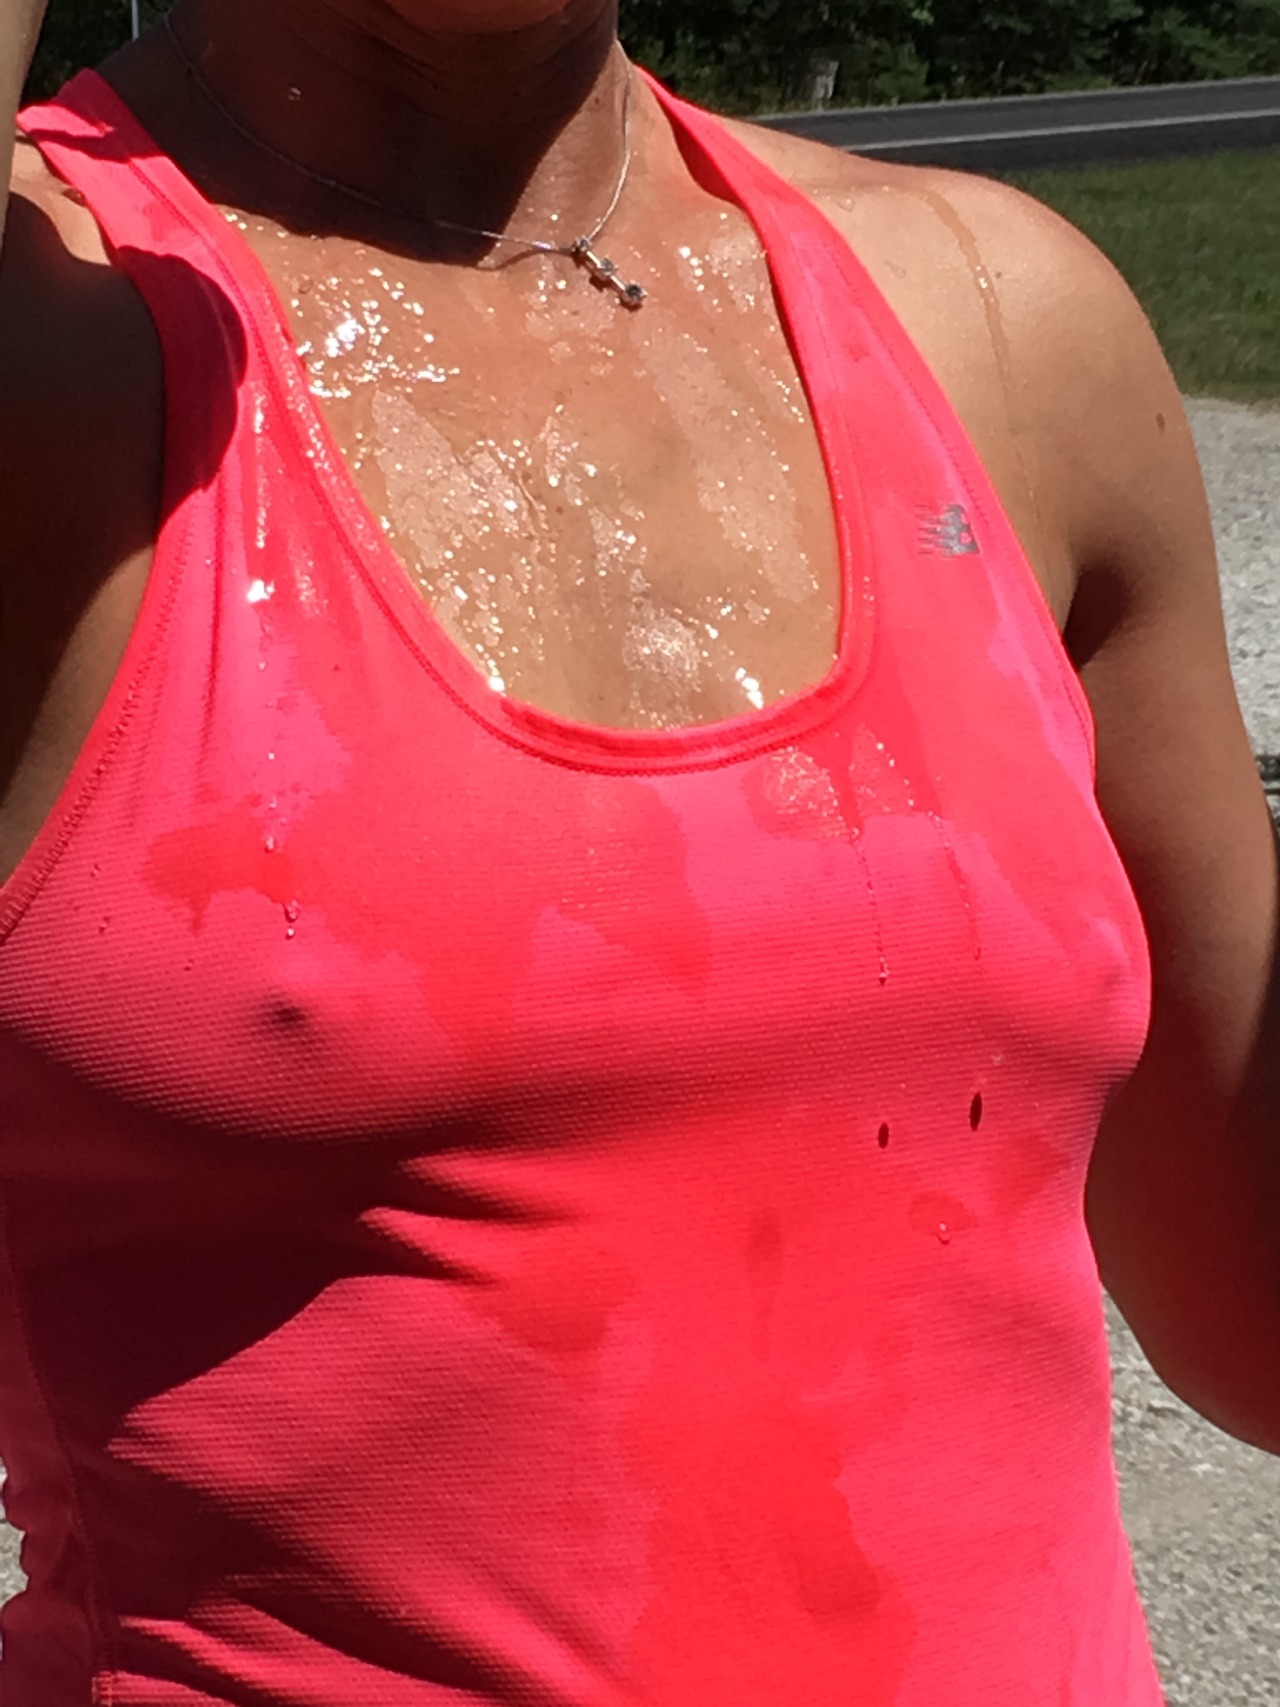 soccer-mom-marie:  It’s too hot for a bra today! Who wants to hose me down??? Happy